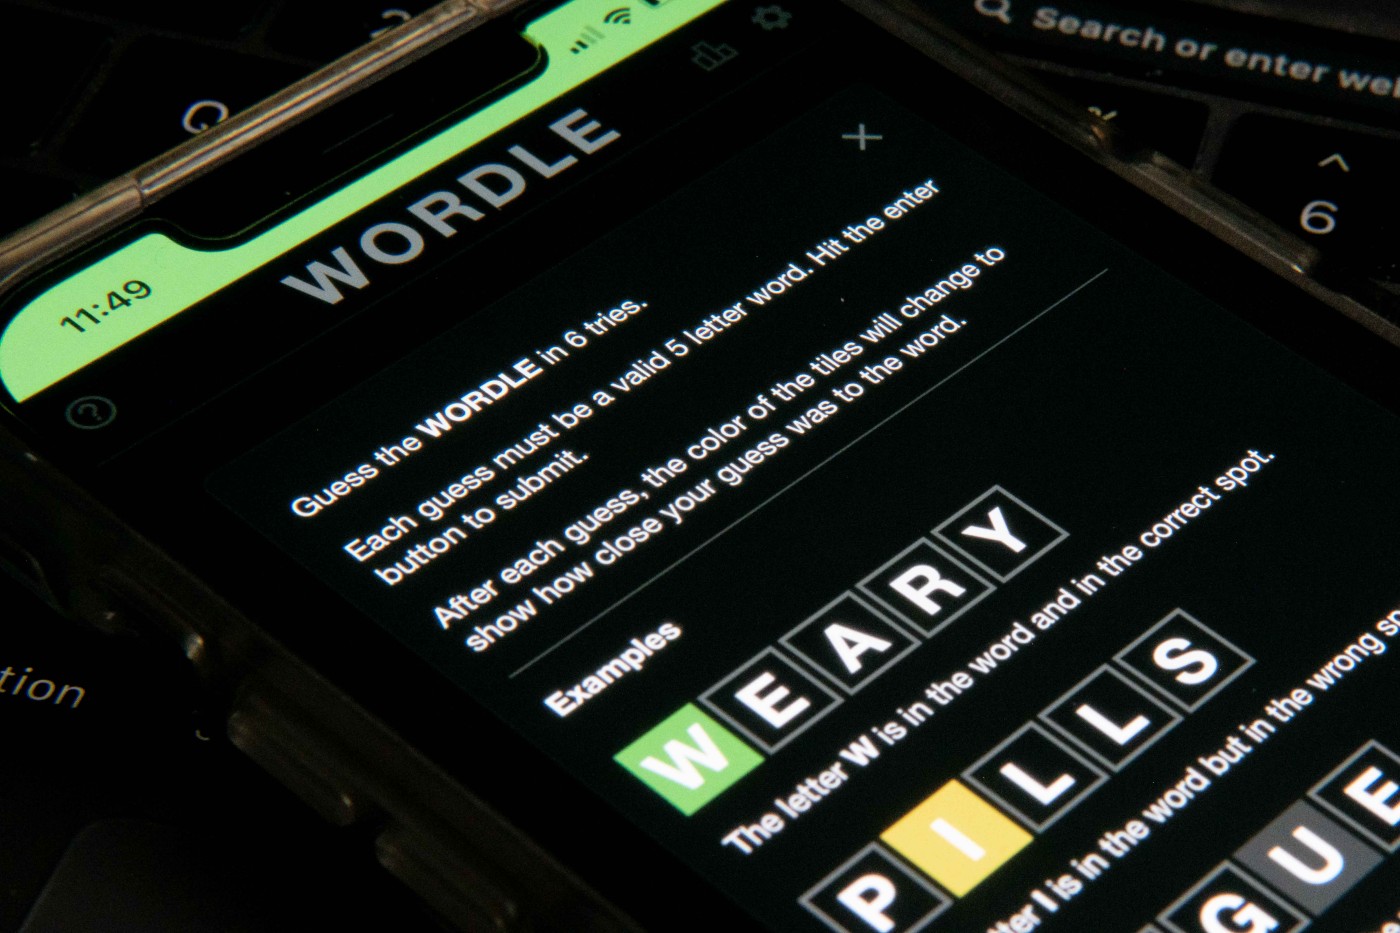 Worldle, the word-guessing game, is shown open on a phone.